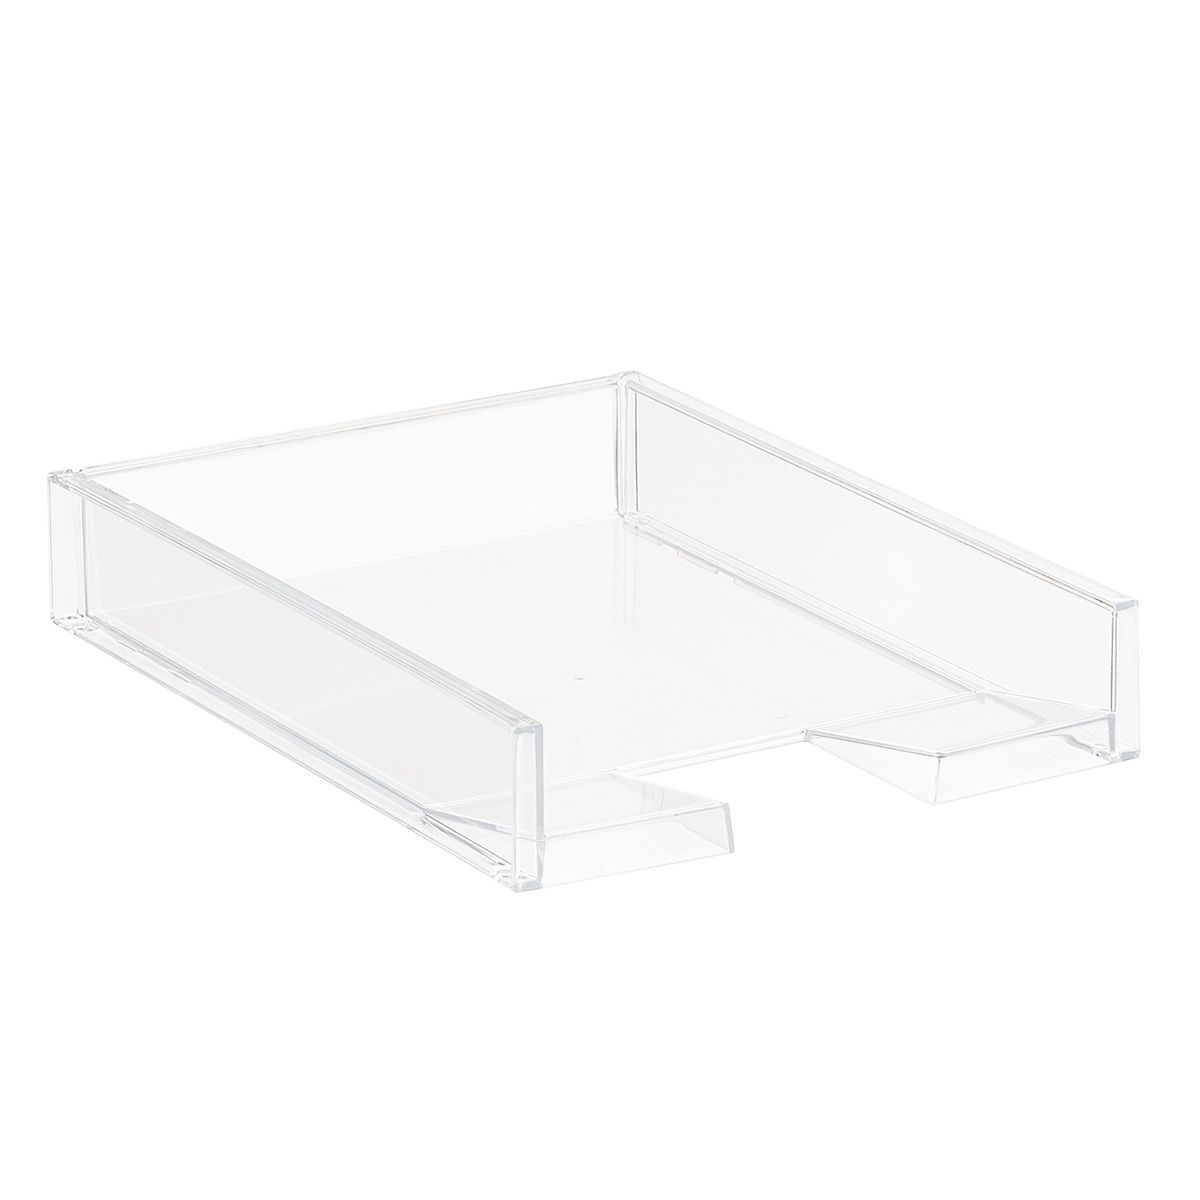 Letter Tray | The Container Store